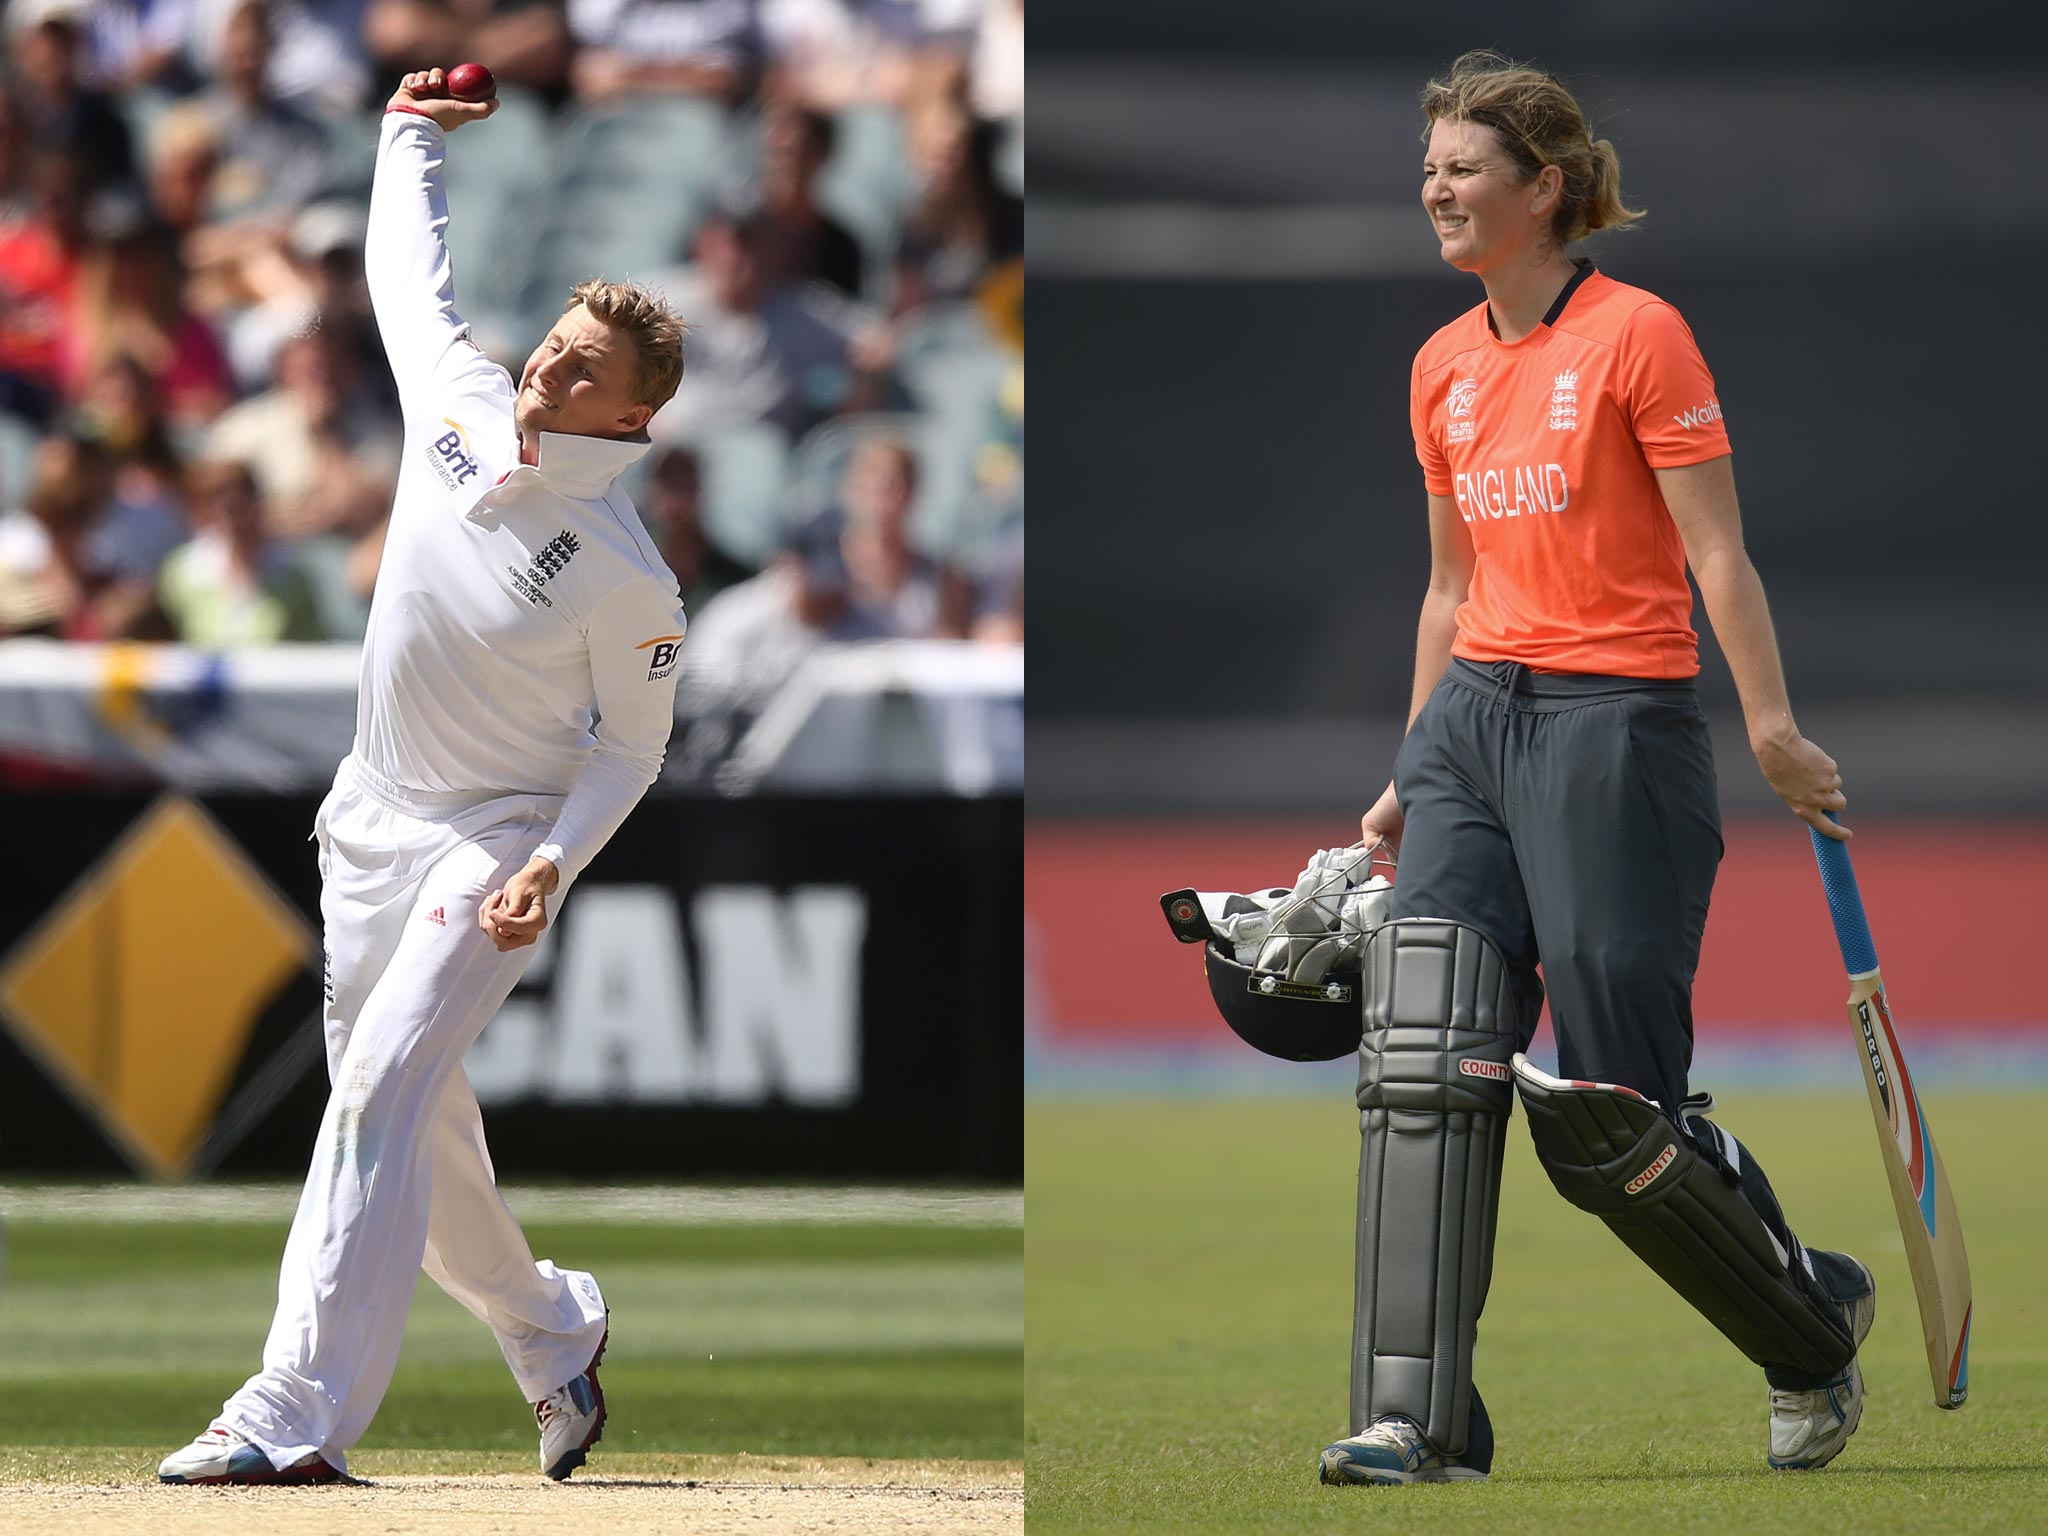 Joe Root and Charlotte Edwards have been included in the Wisden Cricketer of the Year 